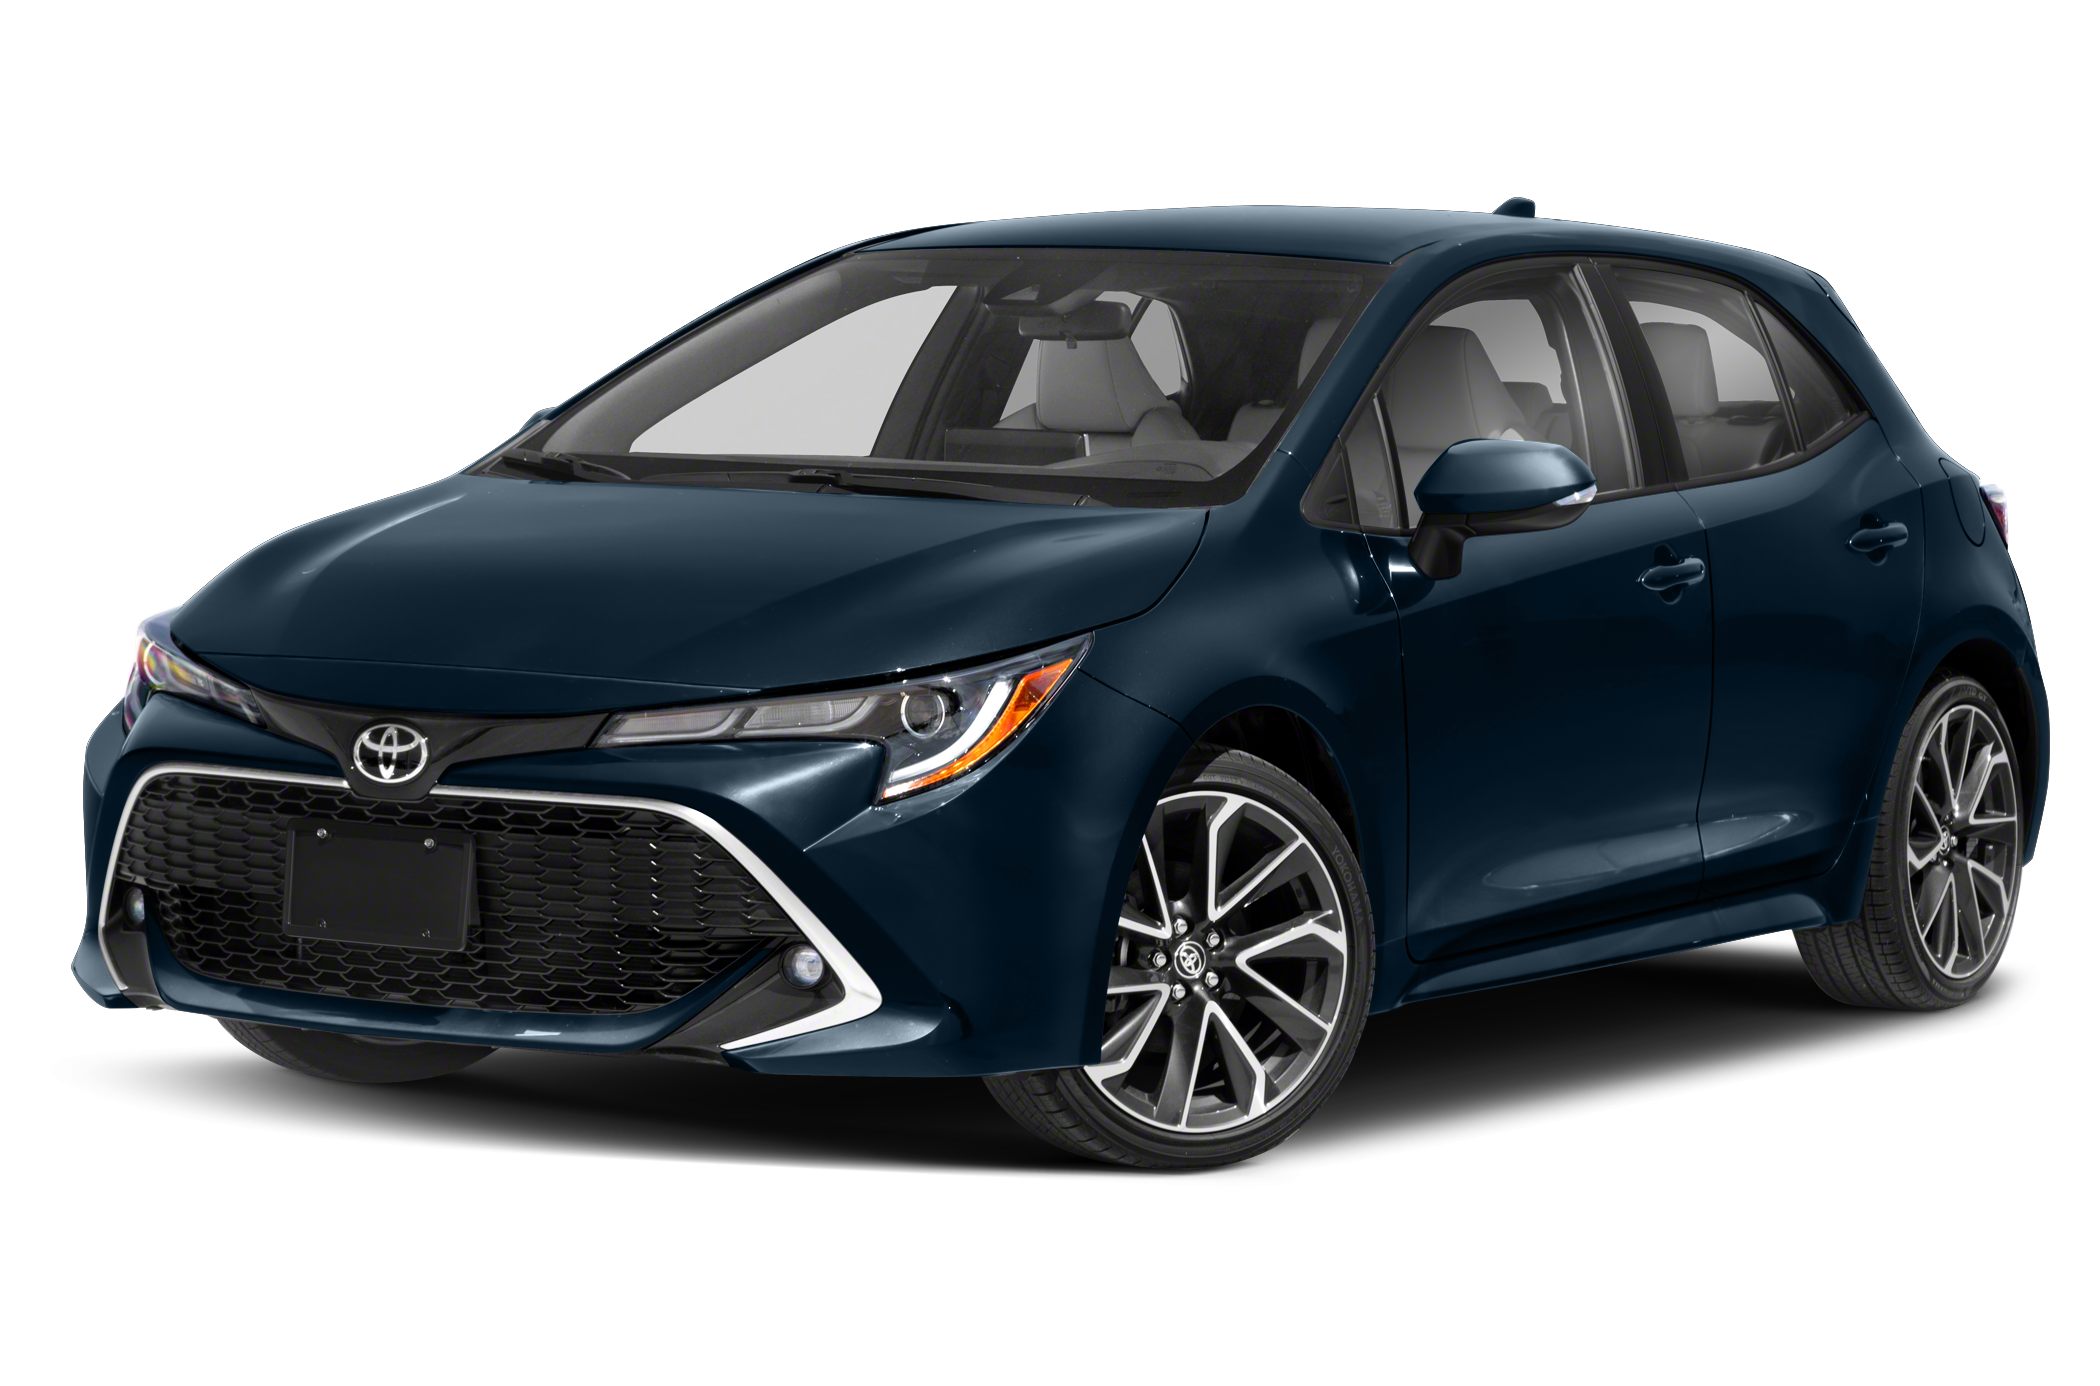 2020 Toyota Corolla Hatchback Xse 5dr Pictures